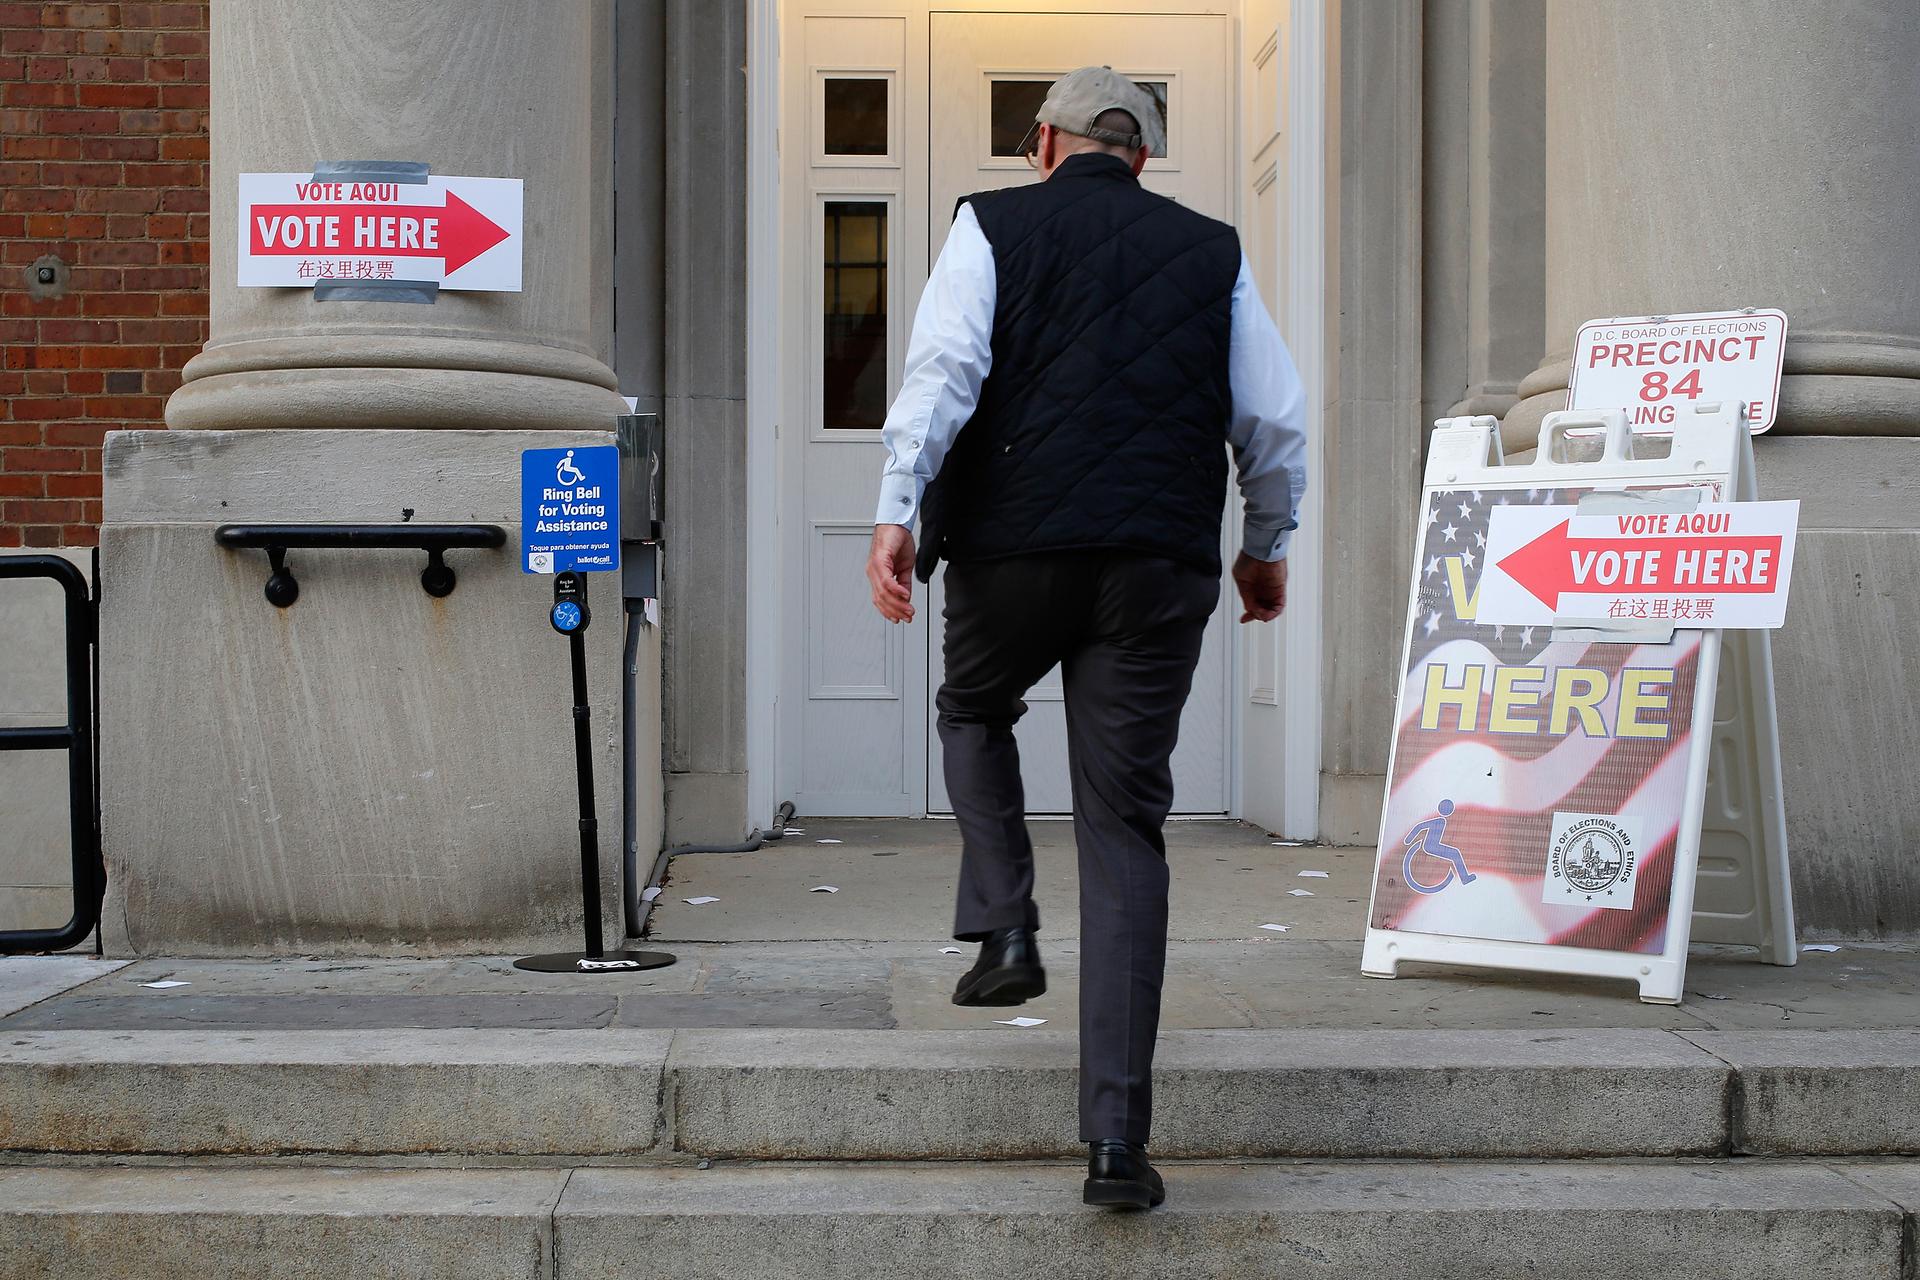 A voter enters the polling place on Election Day at Stuart-Hobson Middle School in Washington, DC, on November 4, 2014.